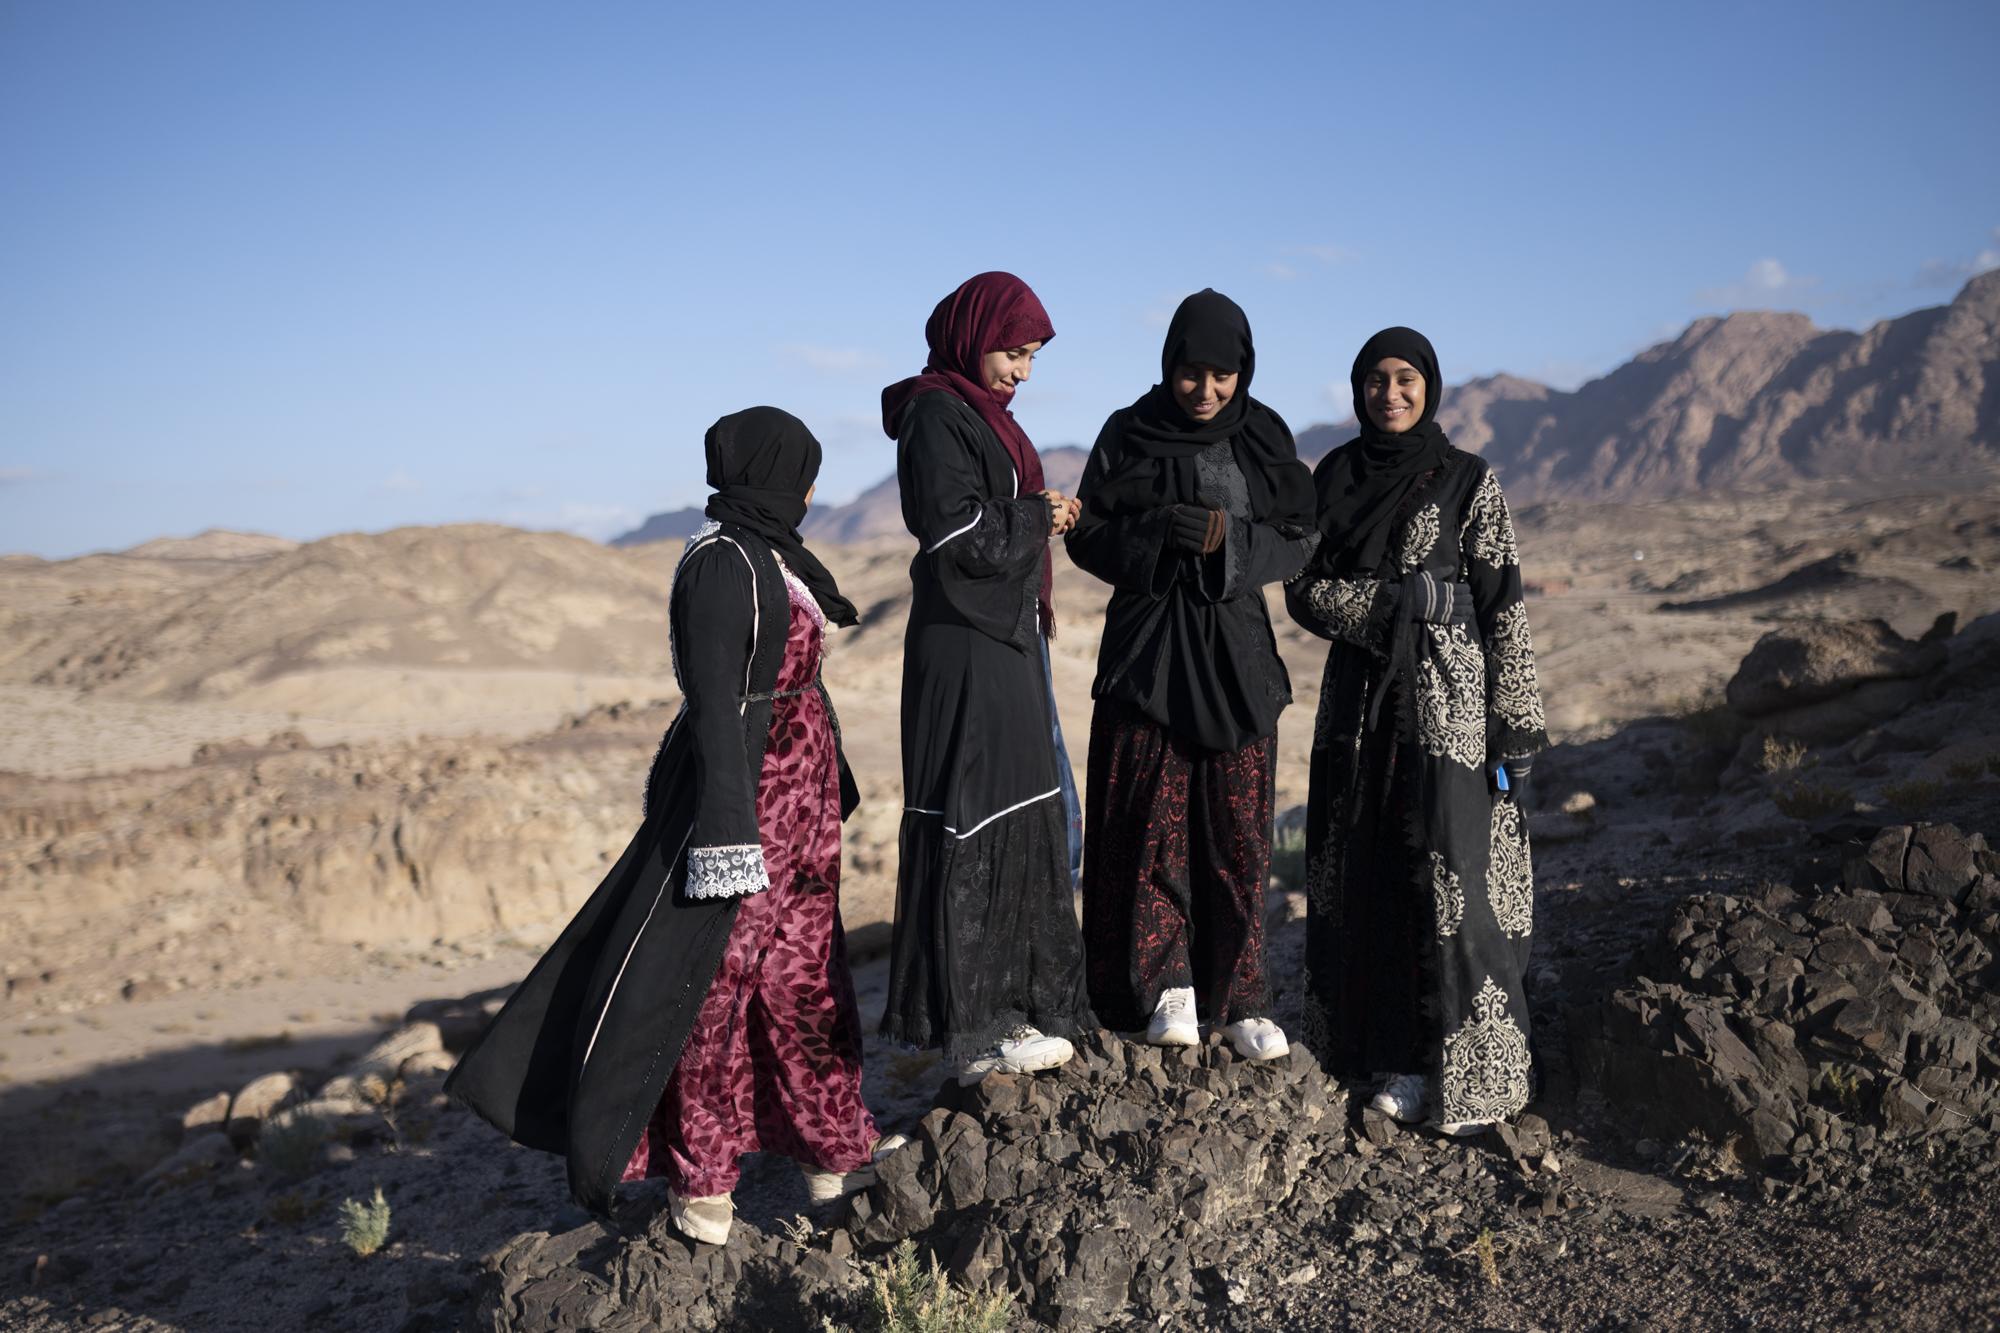 On National Geographic: In one of Egypt's most spiritual places, Bedouins find peace and resilience - From left, Nora Mohamed, Nadia Mohamed, Hoda Mohamed, and Mariam Ibrahim &nbsp;stand on a...